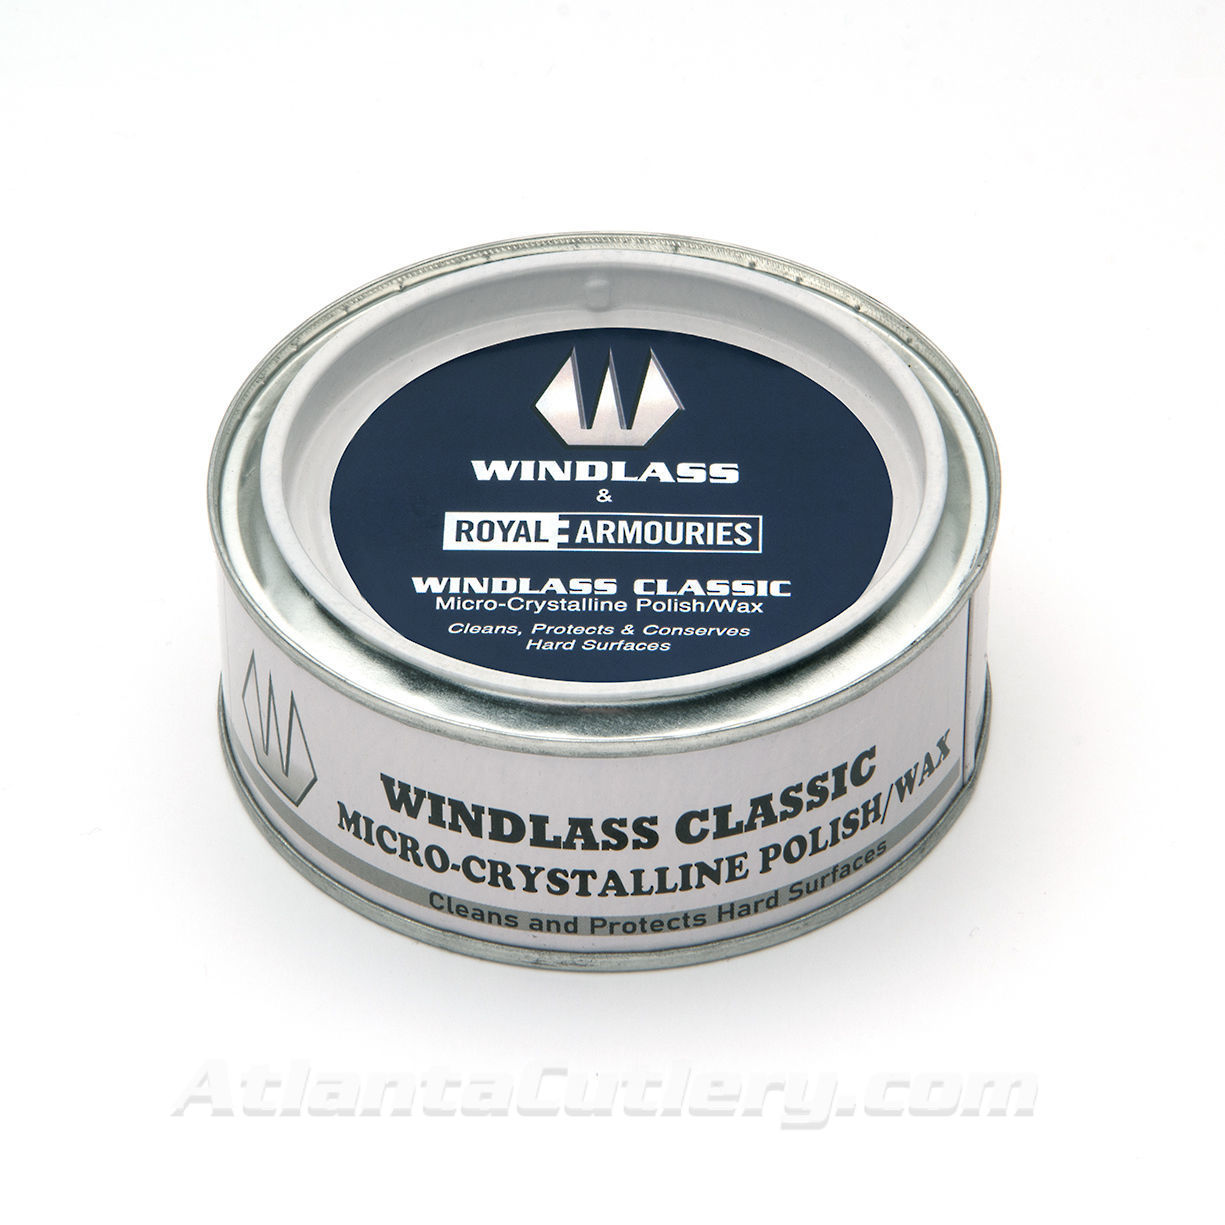 Windlass Classic Micro-Crystalline wax rejuvenates wood, leather, metal, polished stone, and other hard surfaces and is acid free